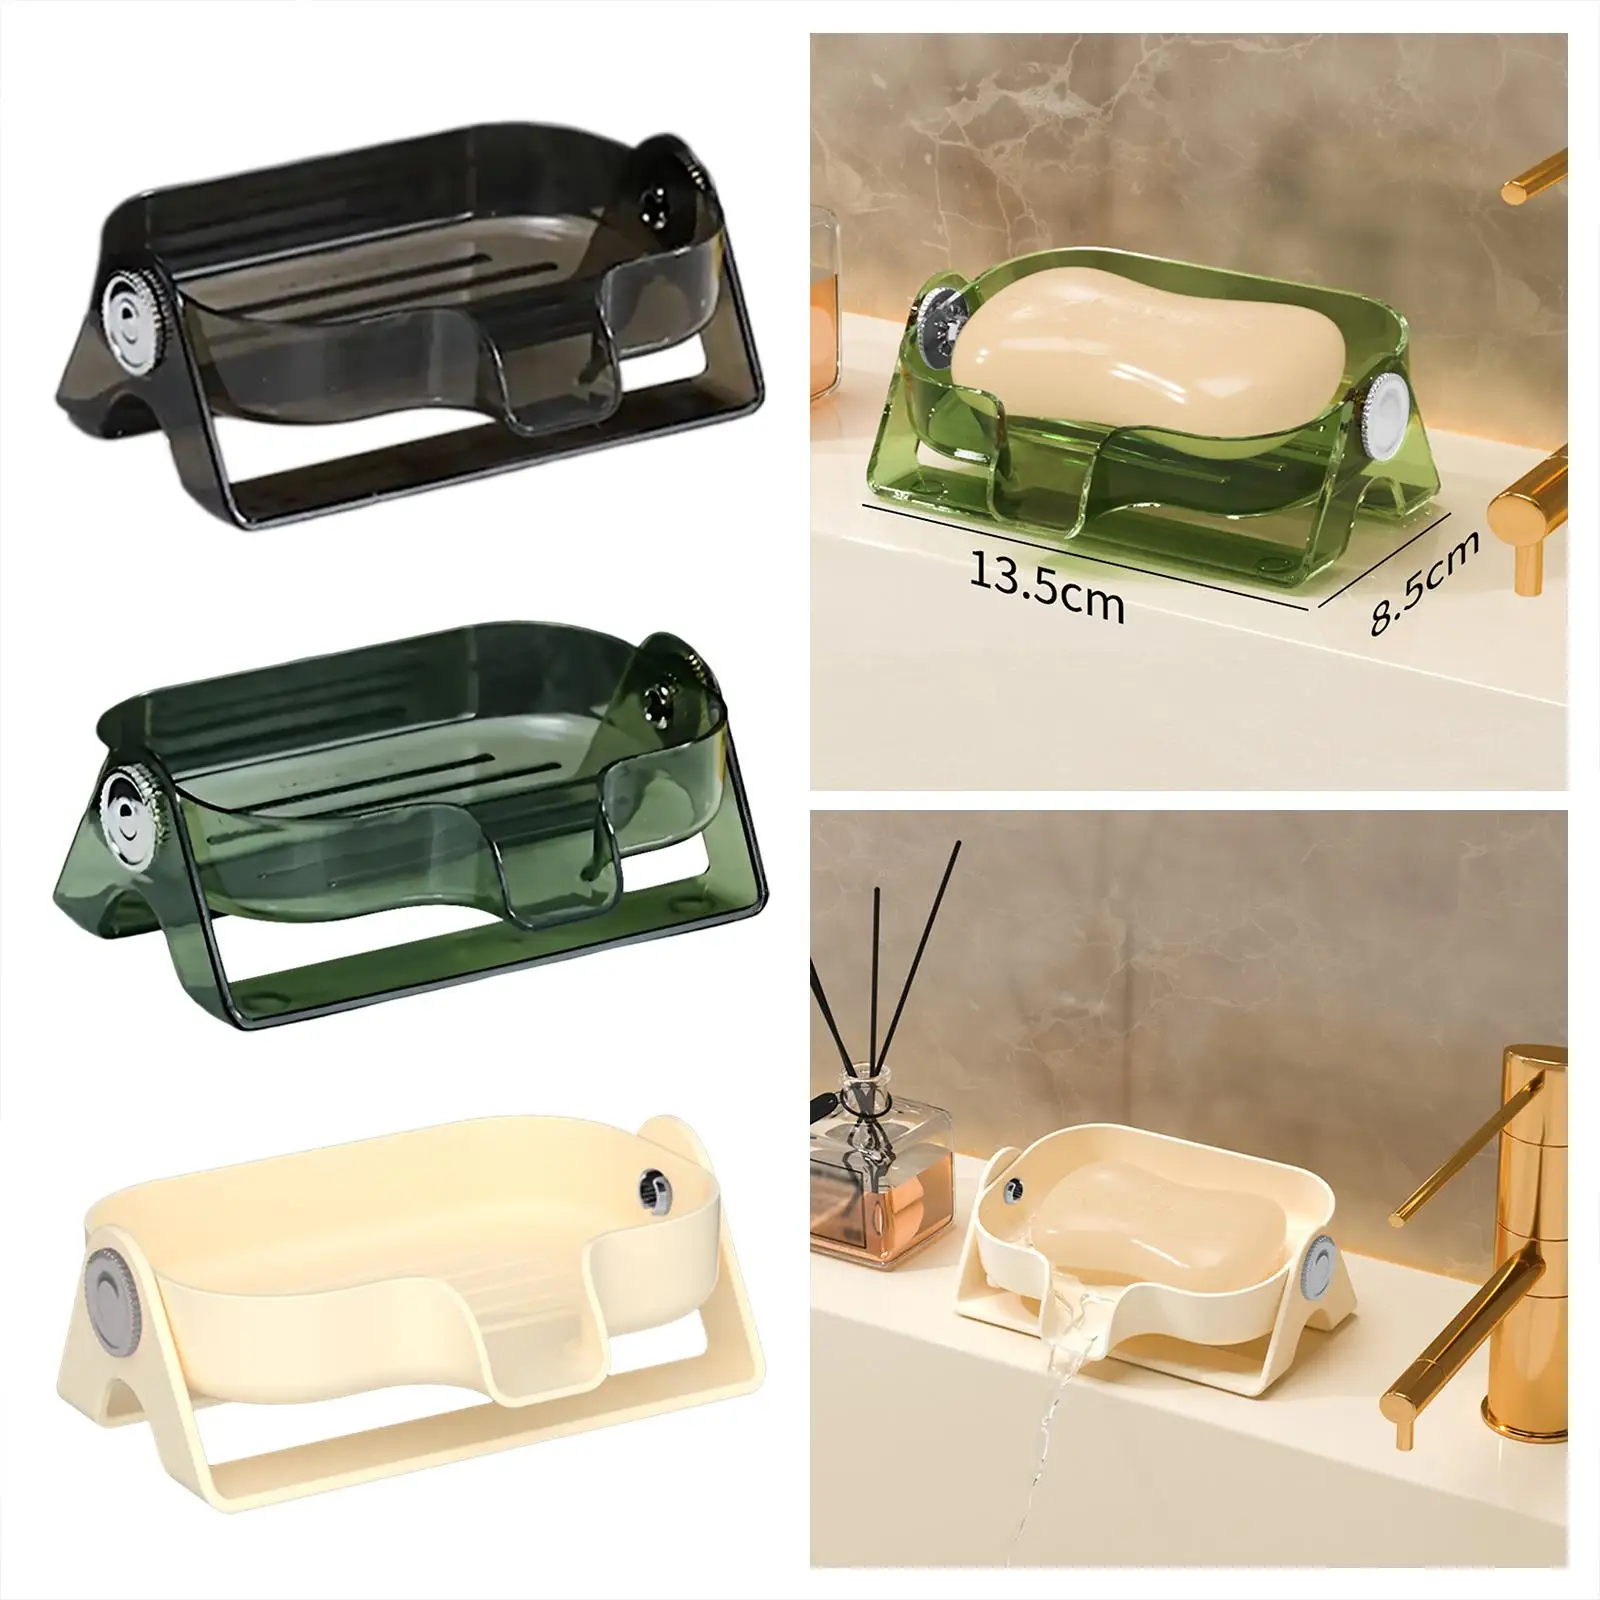 Soap Holder Compact Keep Soap Dry Free Standing Waterfall Soap Saver Soap Container for Kitchen Sink Bathroom Shower Balcony